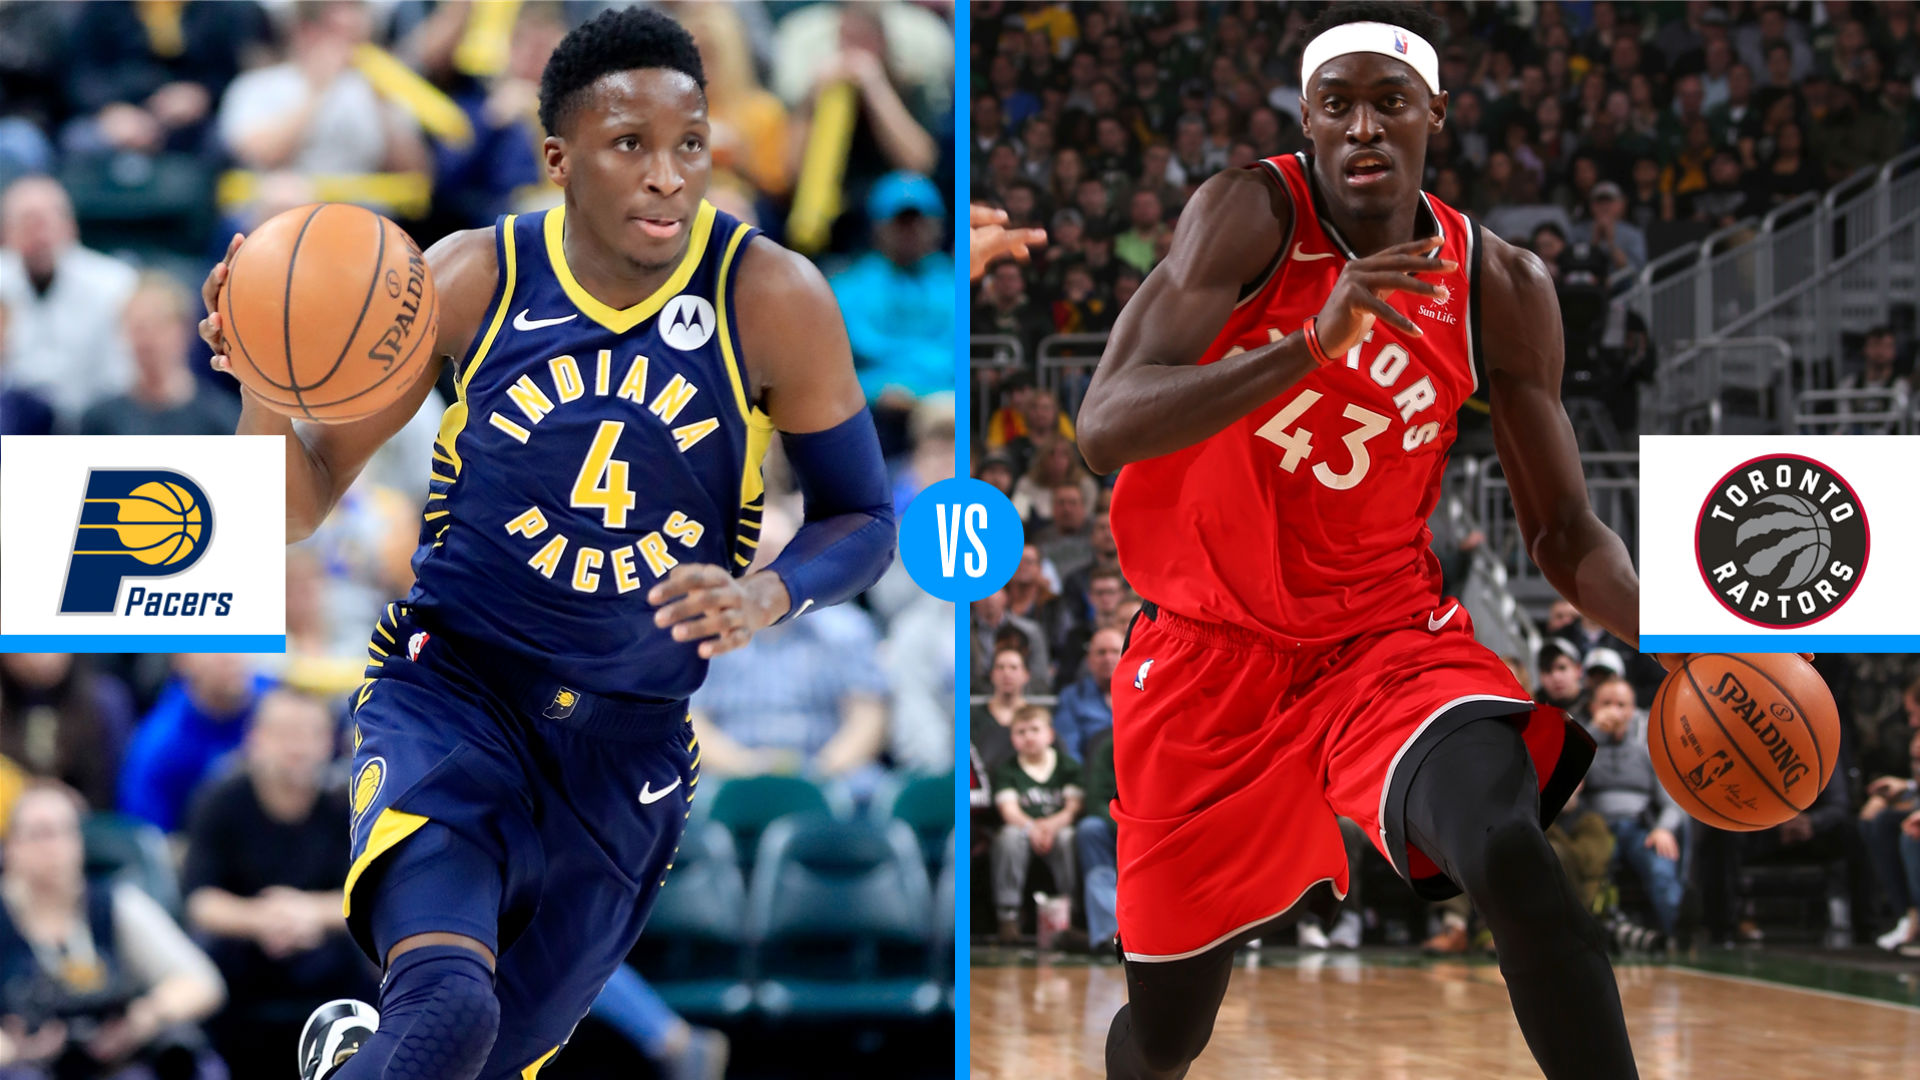 Indiana Pacers vs Toronto Raptors: Game preview, live stream, TV channel, start time ...